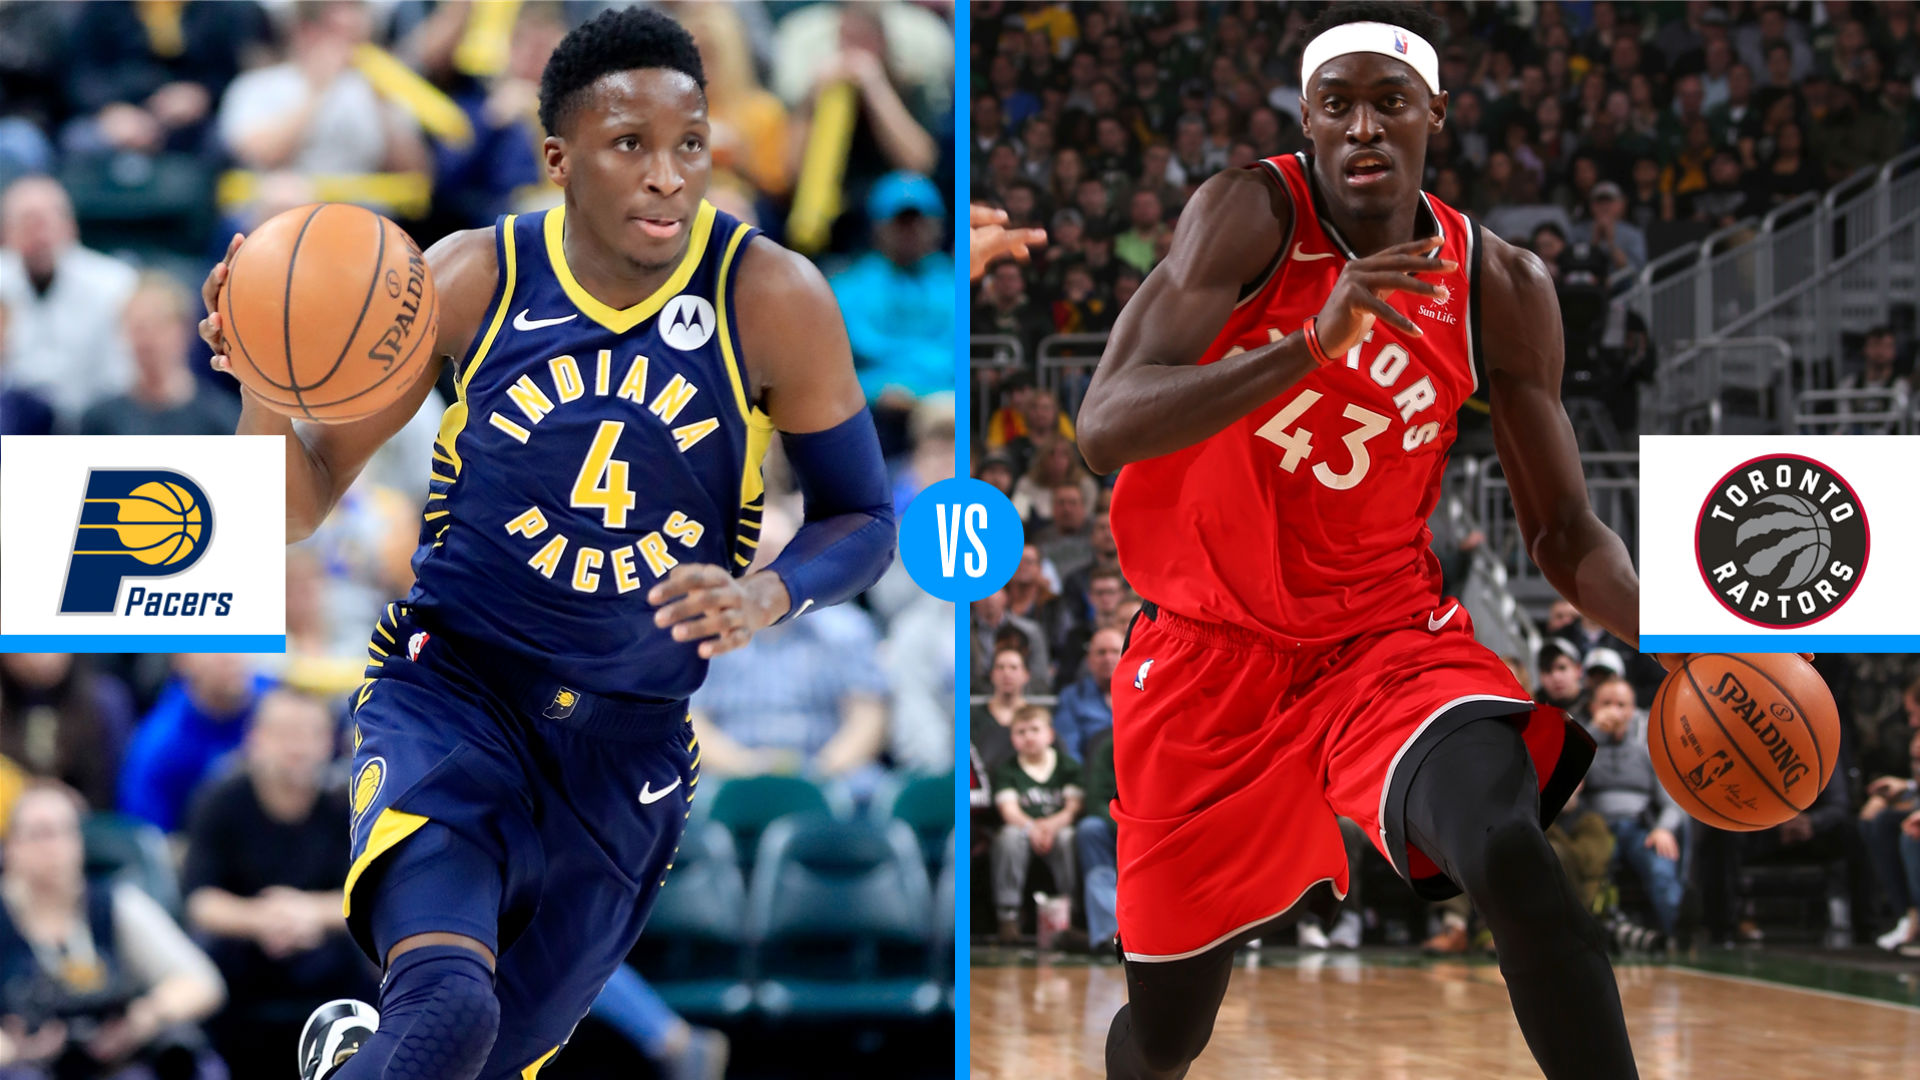 Indiana Pacers vs Toronto Raptors: Game preview, live stream, TV channel, start time ...